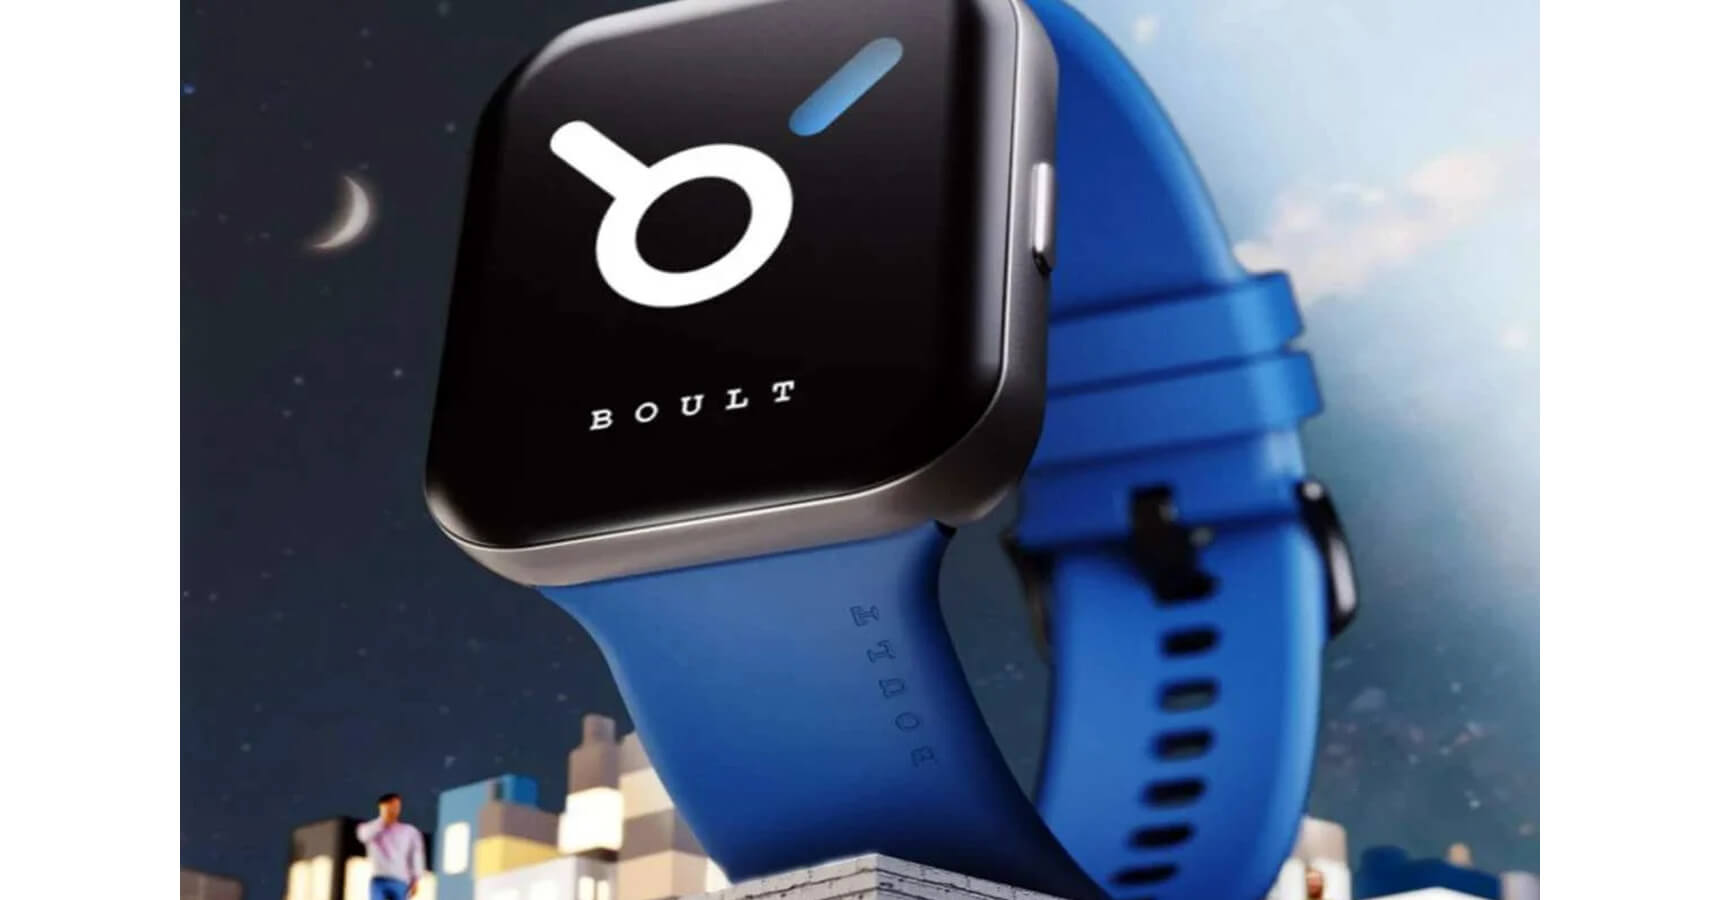 Boult Swing Smartwatch launched